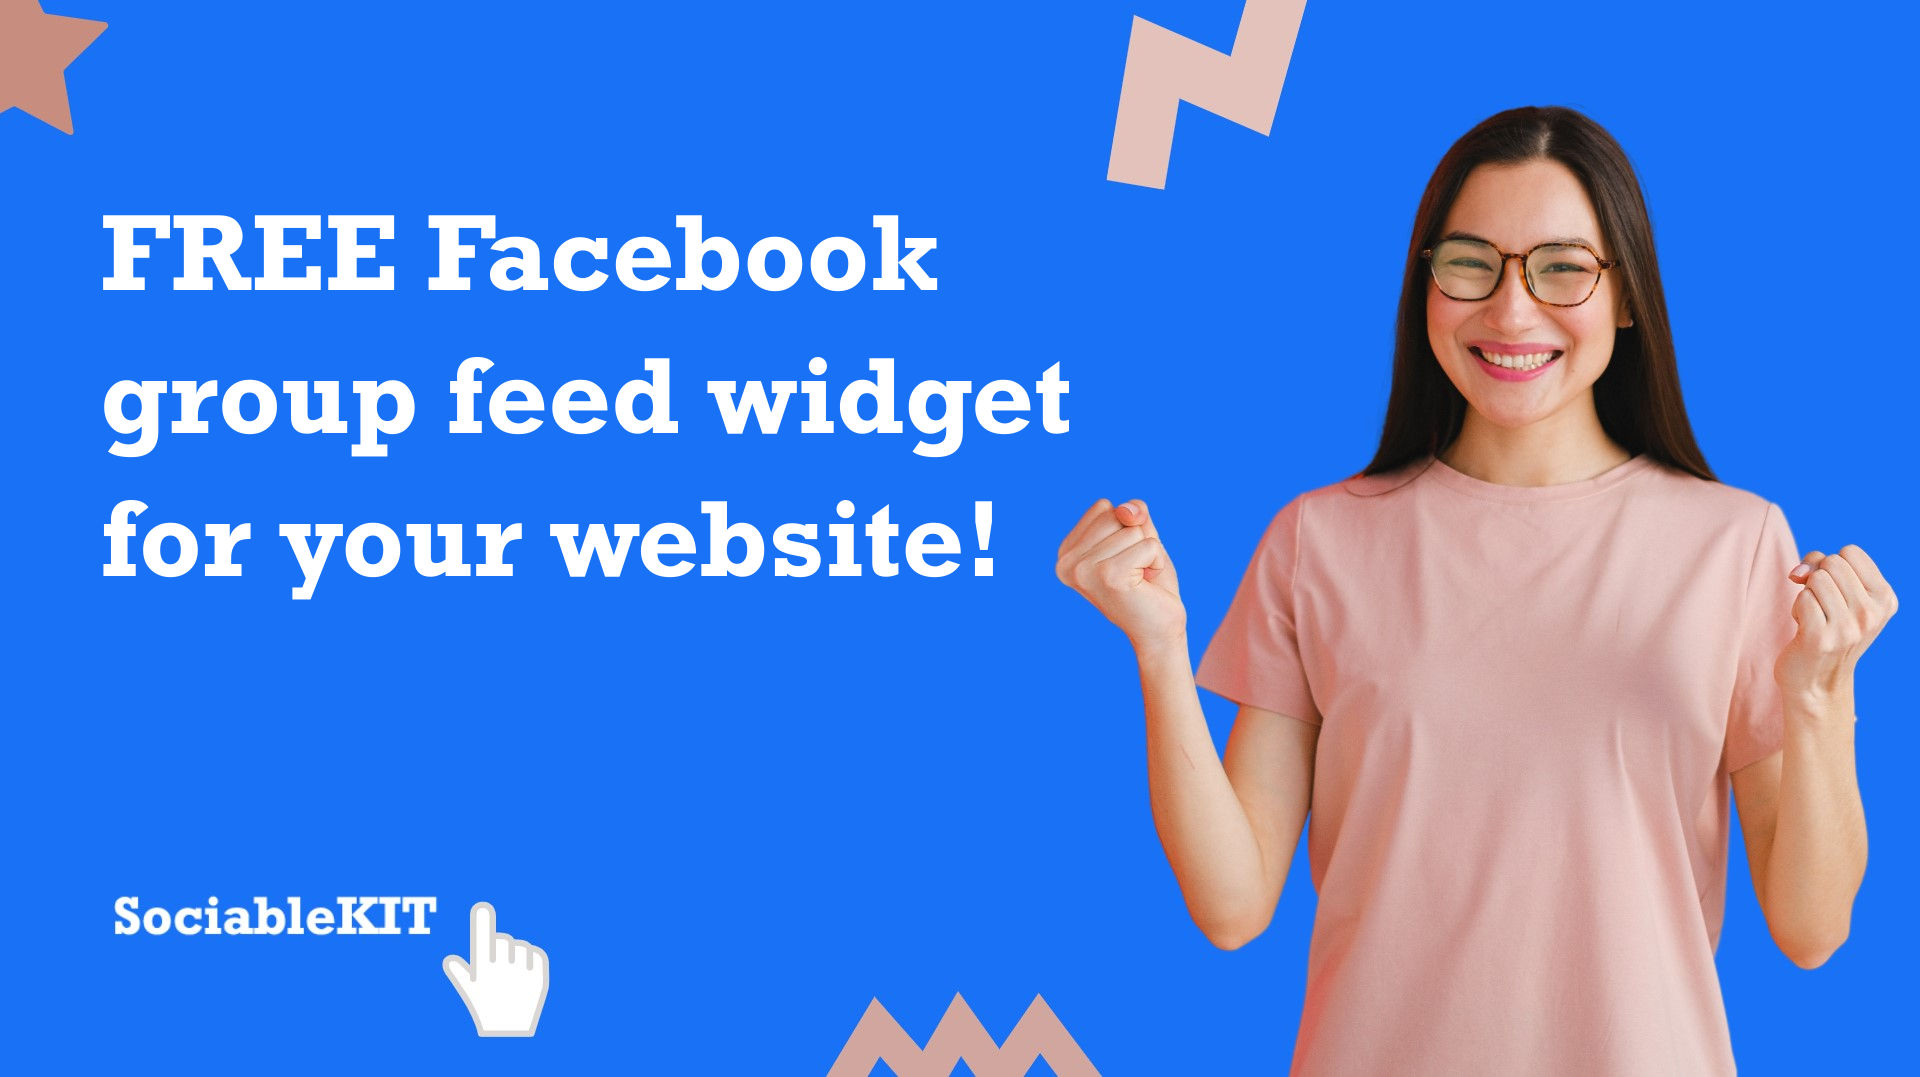 Free Facebook group feed widget for your website